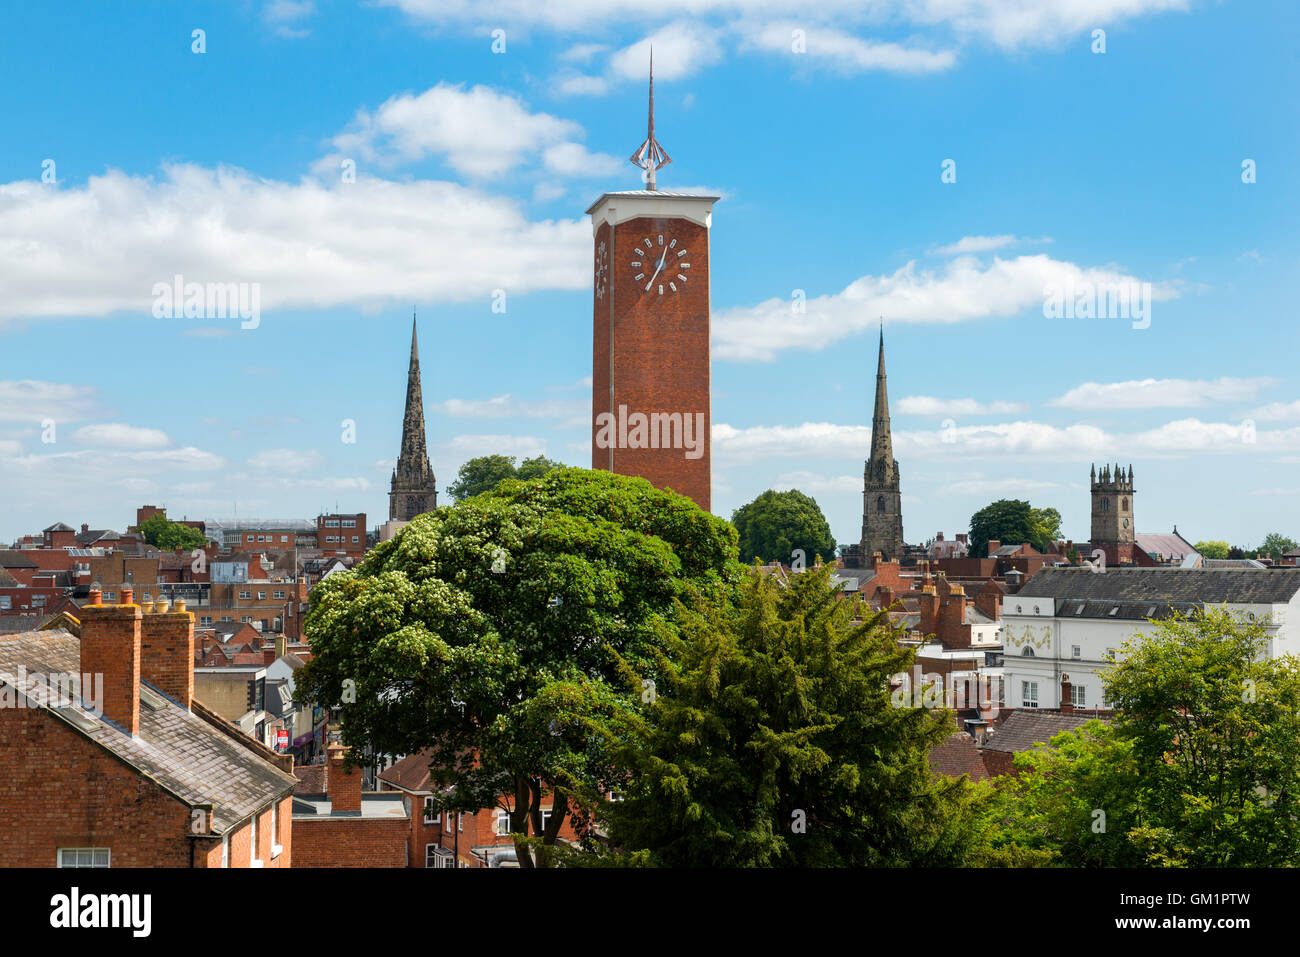 Shrewsbury Market Hall and churches seen from the roof of St Chad's nave, Shropshire. Stock Photo